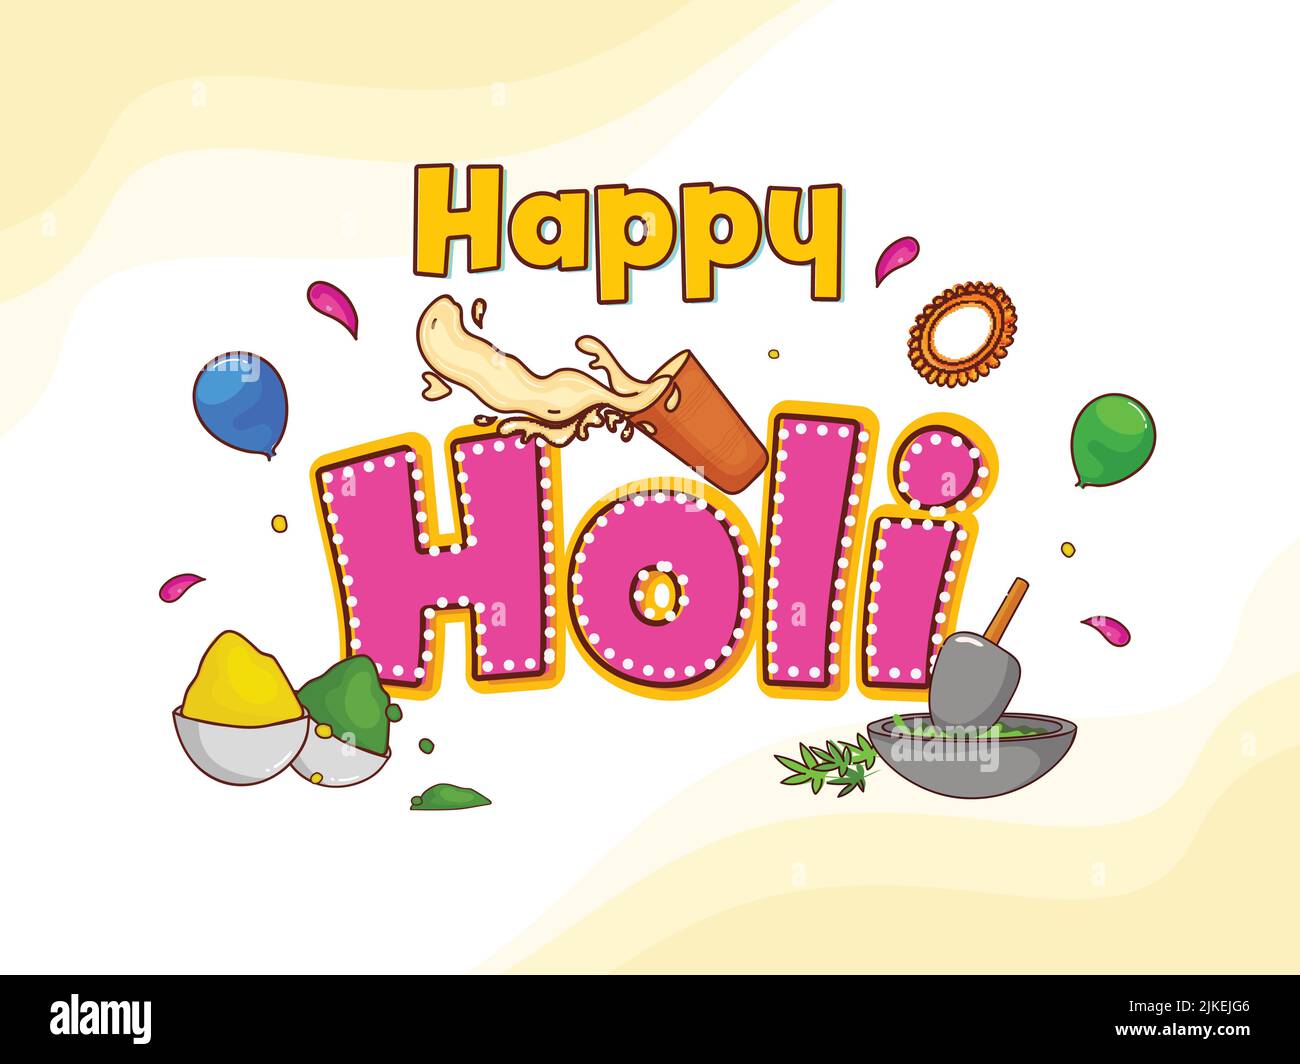 Stylish Happy Holi Font With Bowls Full Of Dry Color (Gulal), Balloons, Splashing Thandai Glass, Datura Leaves Grinding From Mortar And Pestle Illustr Stock Vector